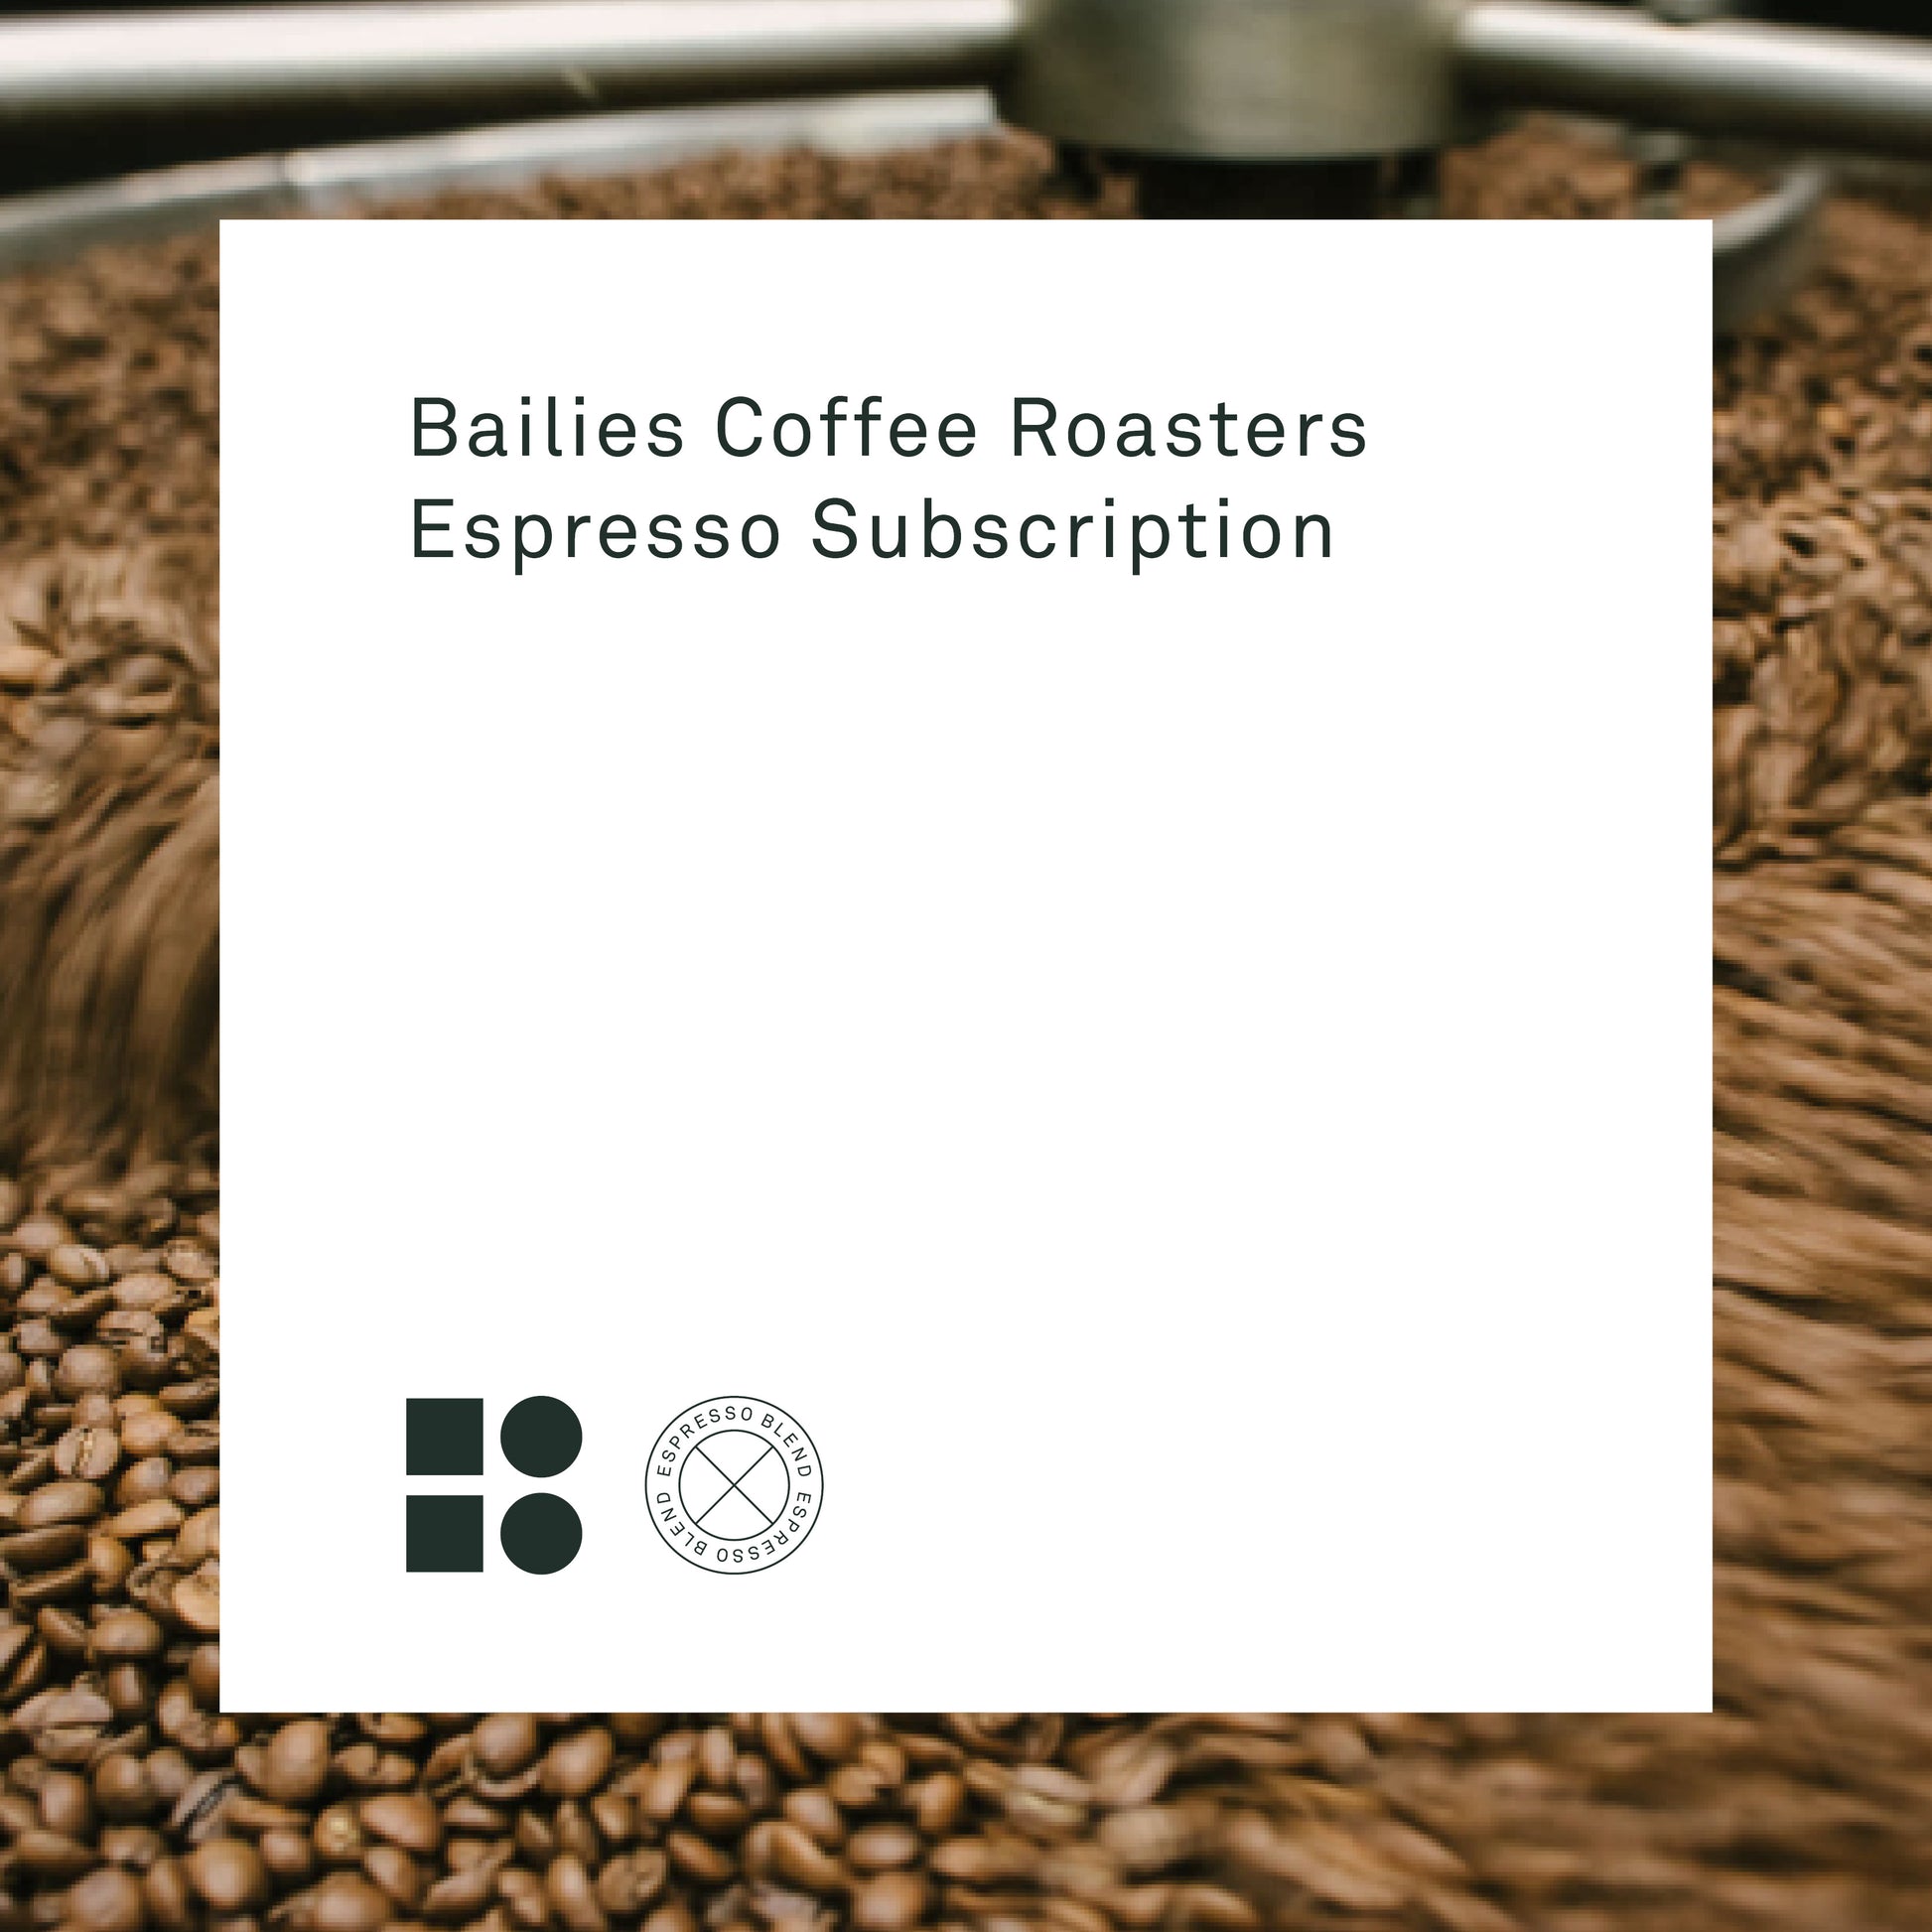 Espresso Coffee Subscription : Delivery Included - Bailies Coffee Roasters